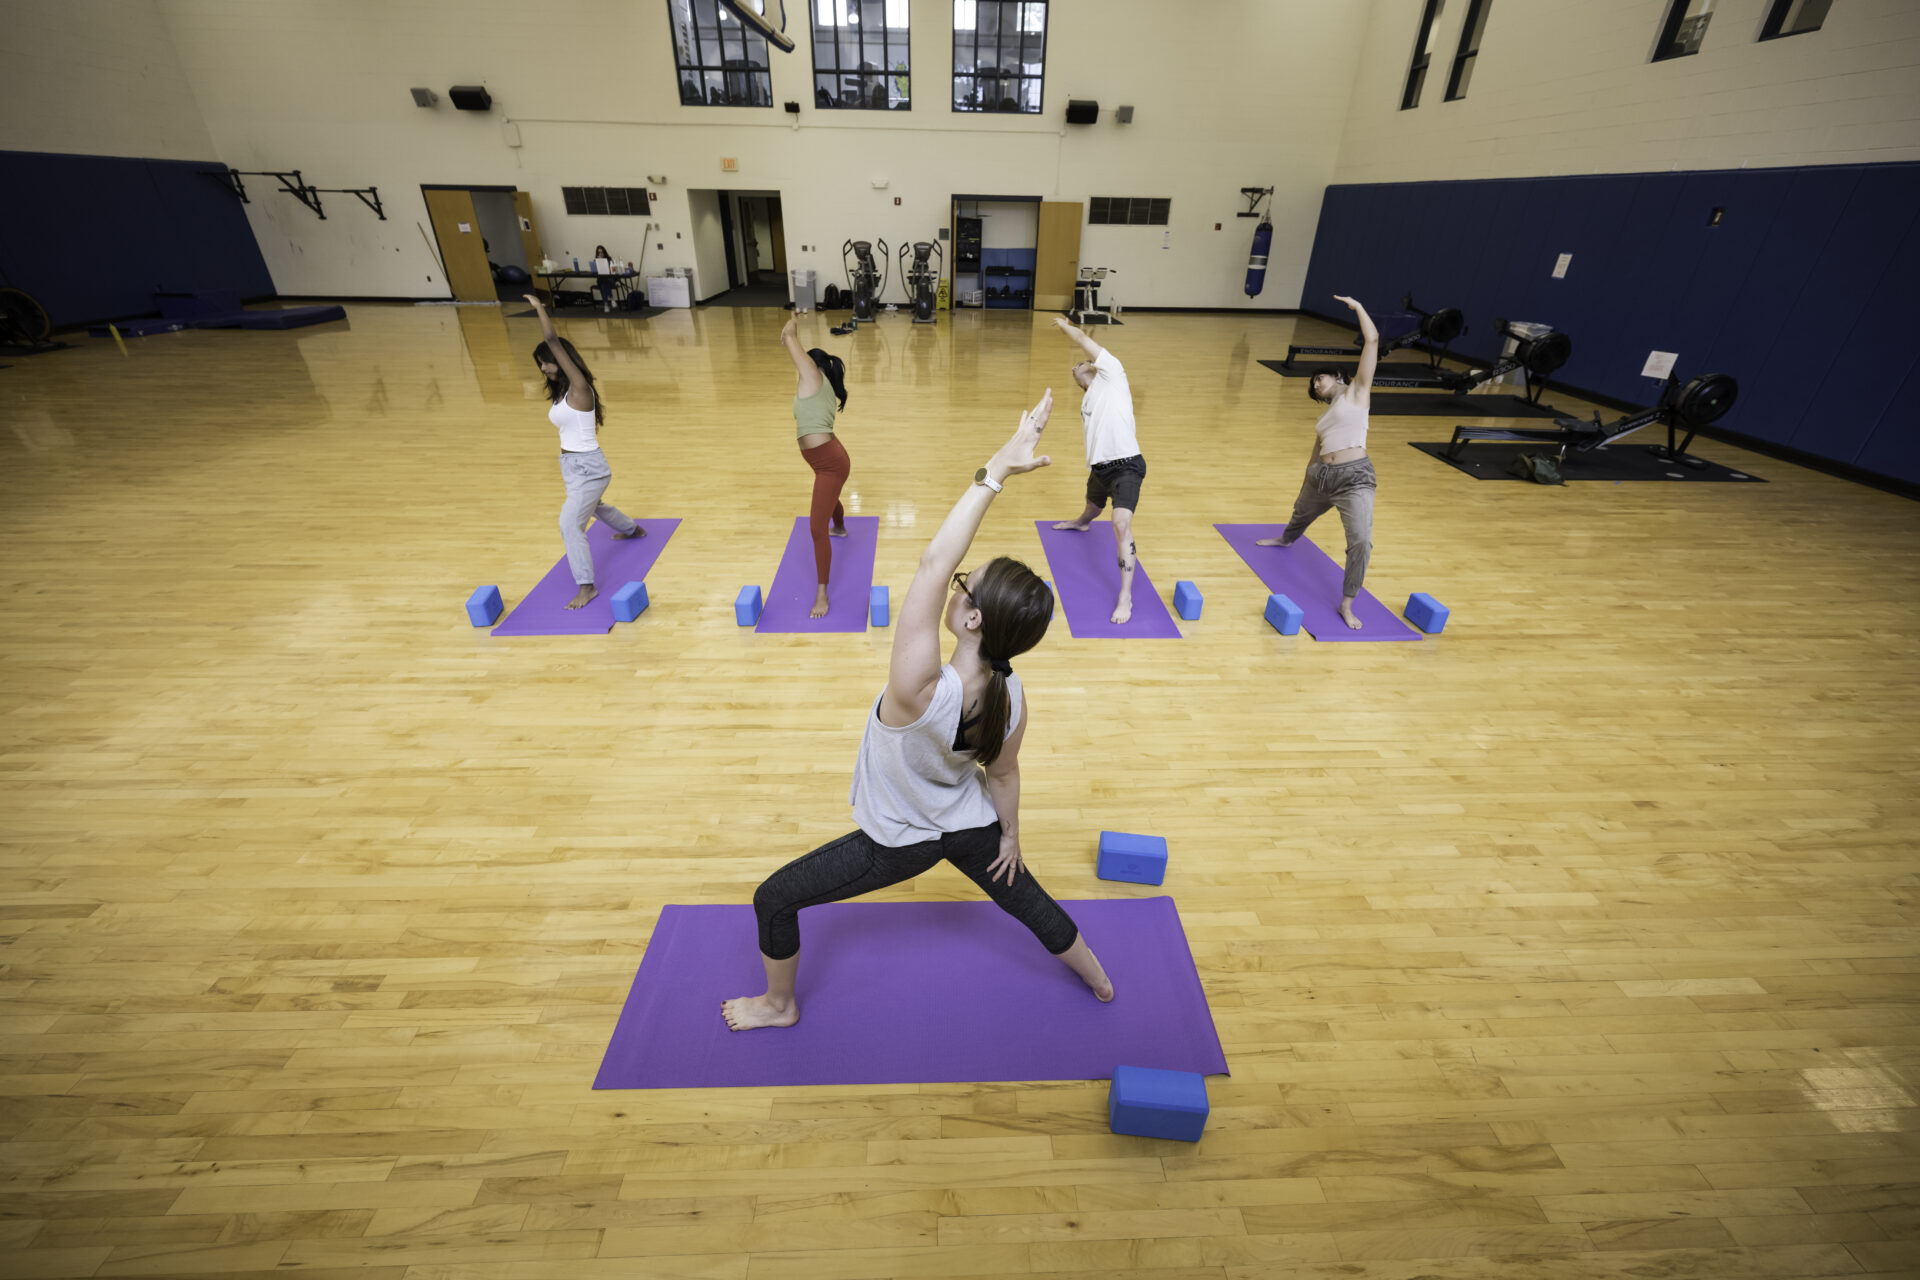 A woman leading a yoga class demonstrating peaceful warrior with four other people following.